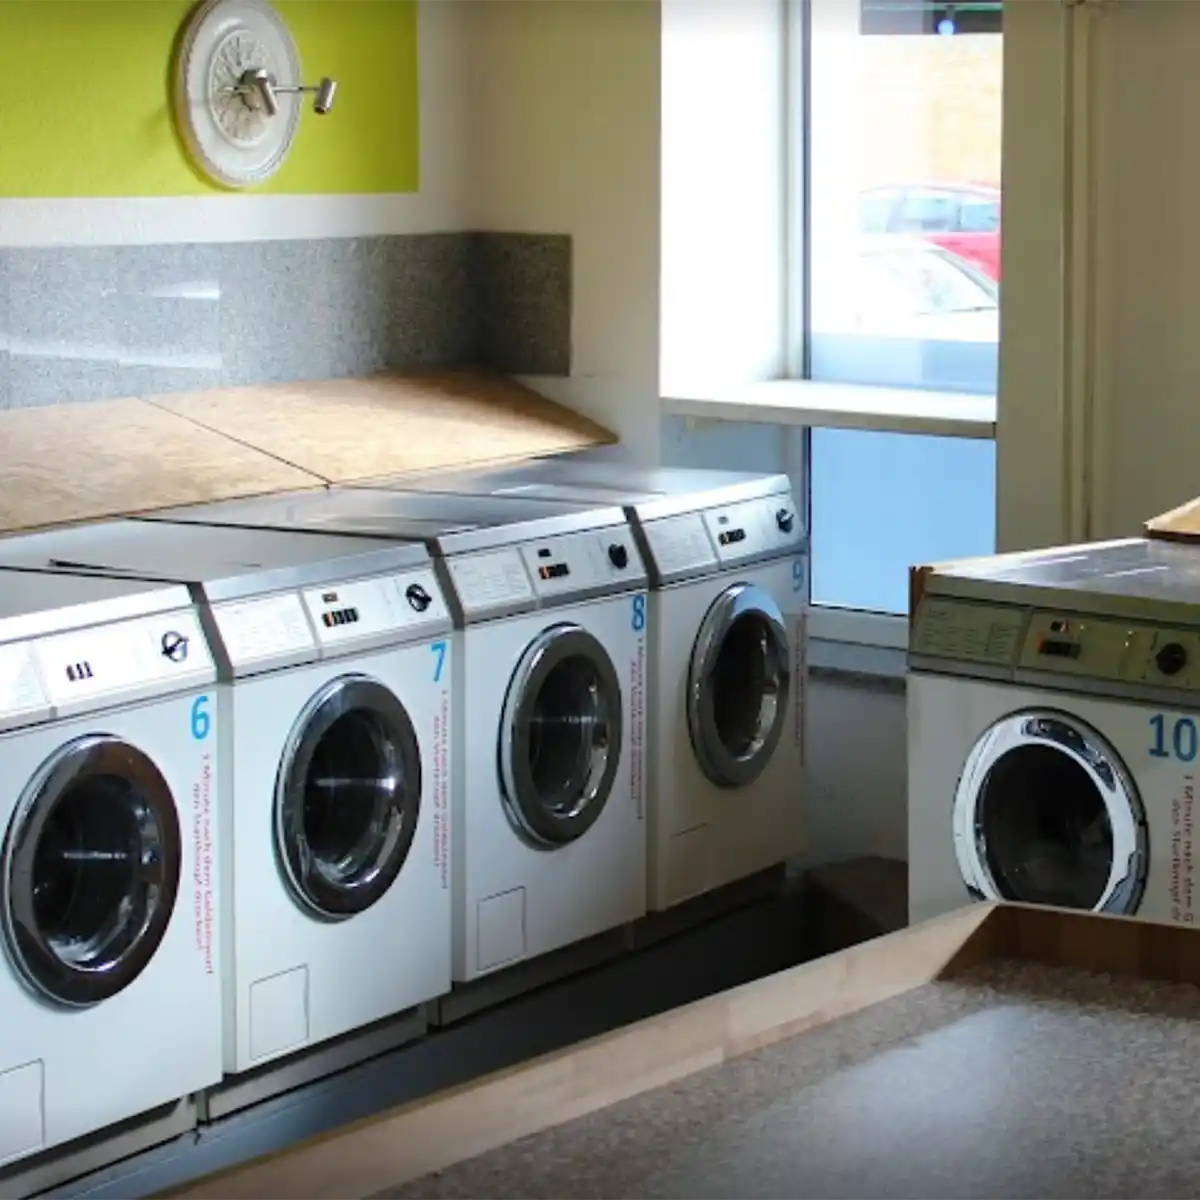 A row of washing machines, each with a large opening with chromed frames